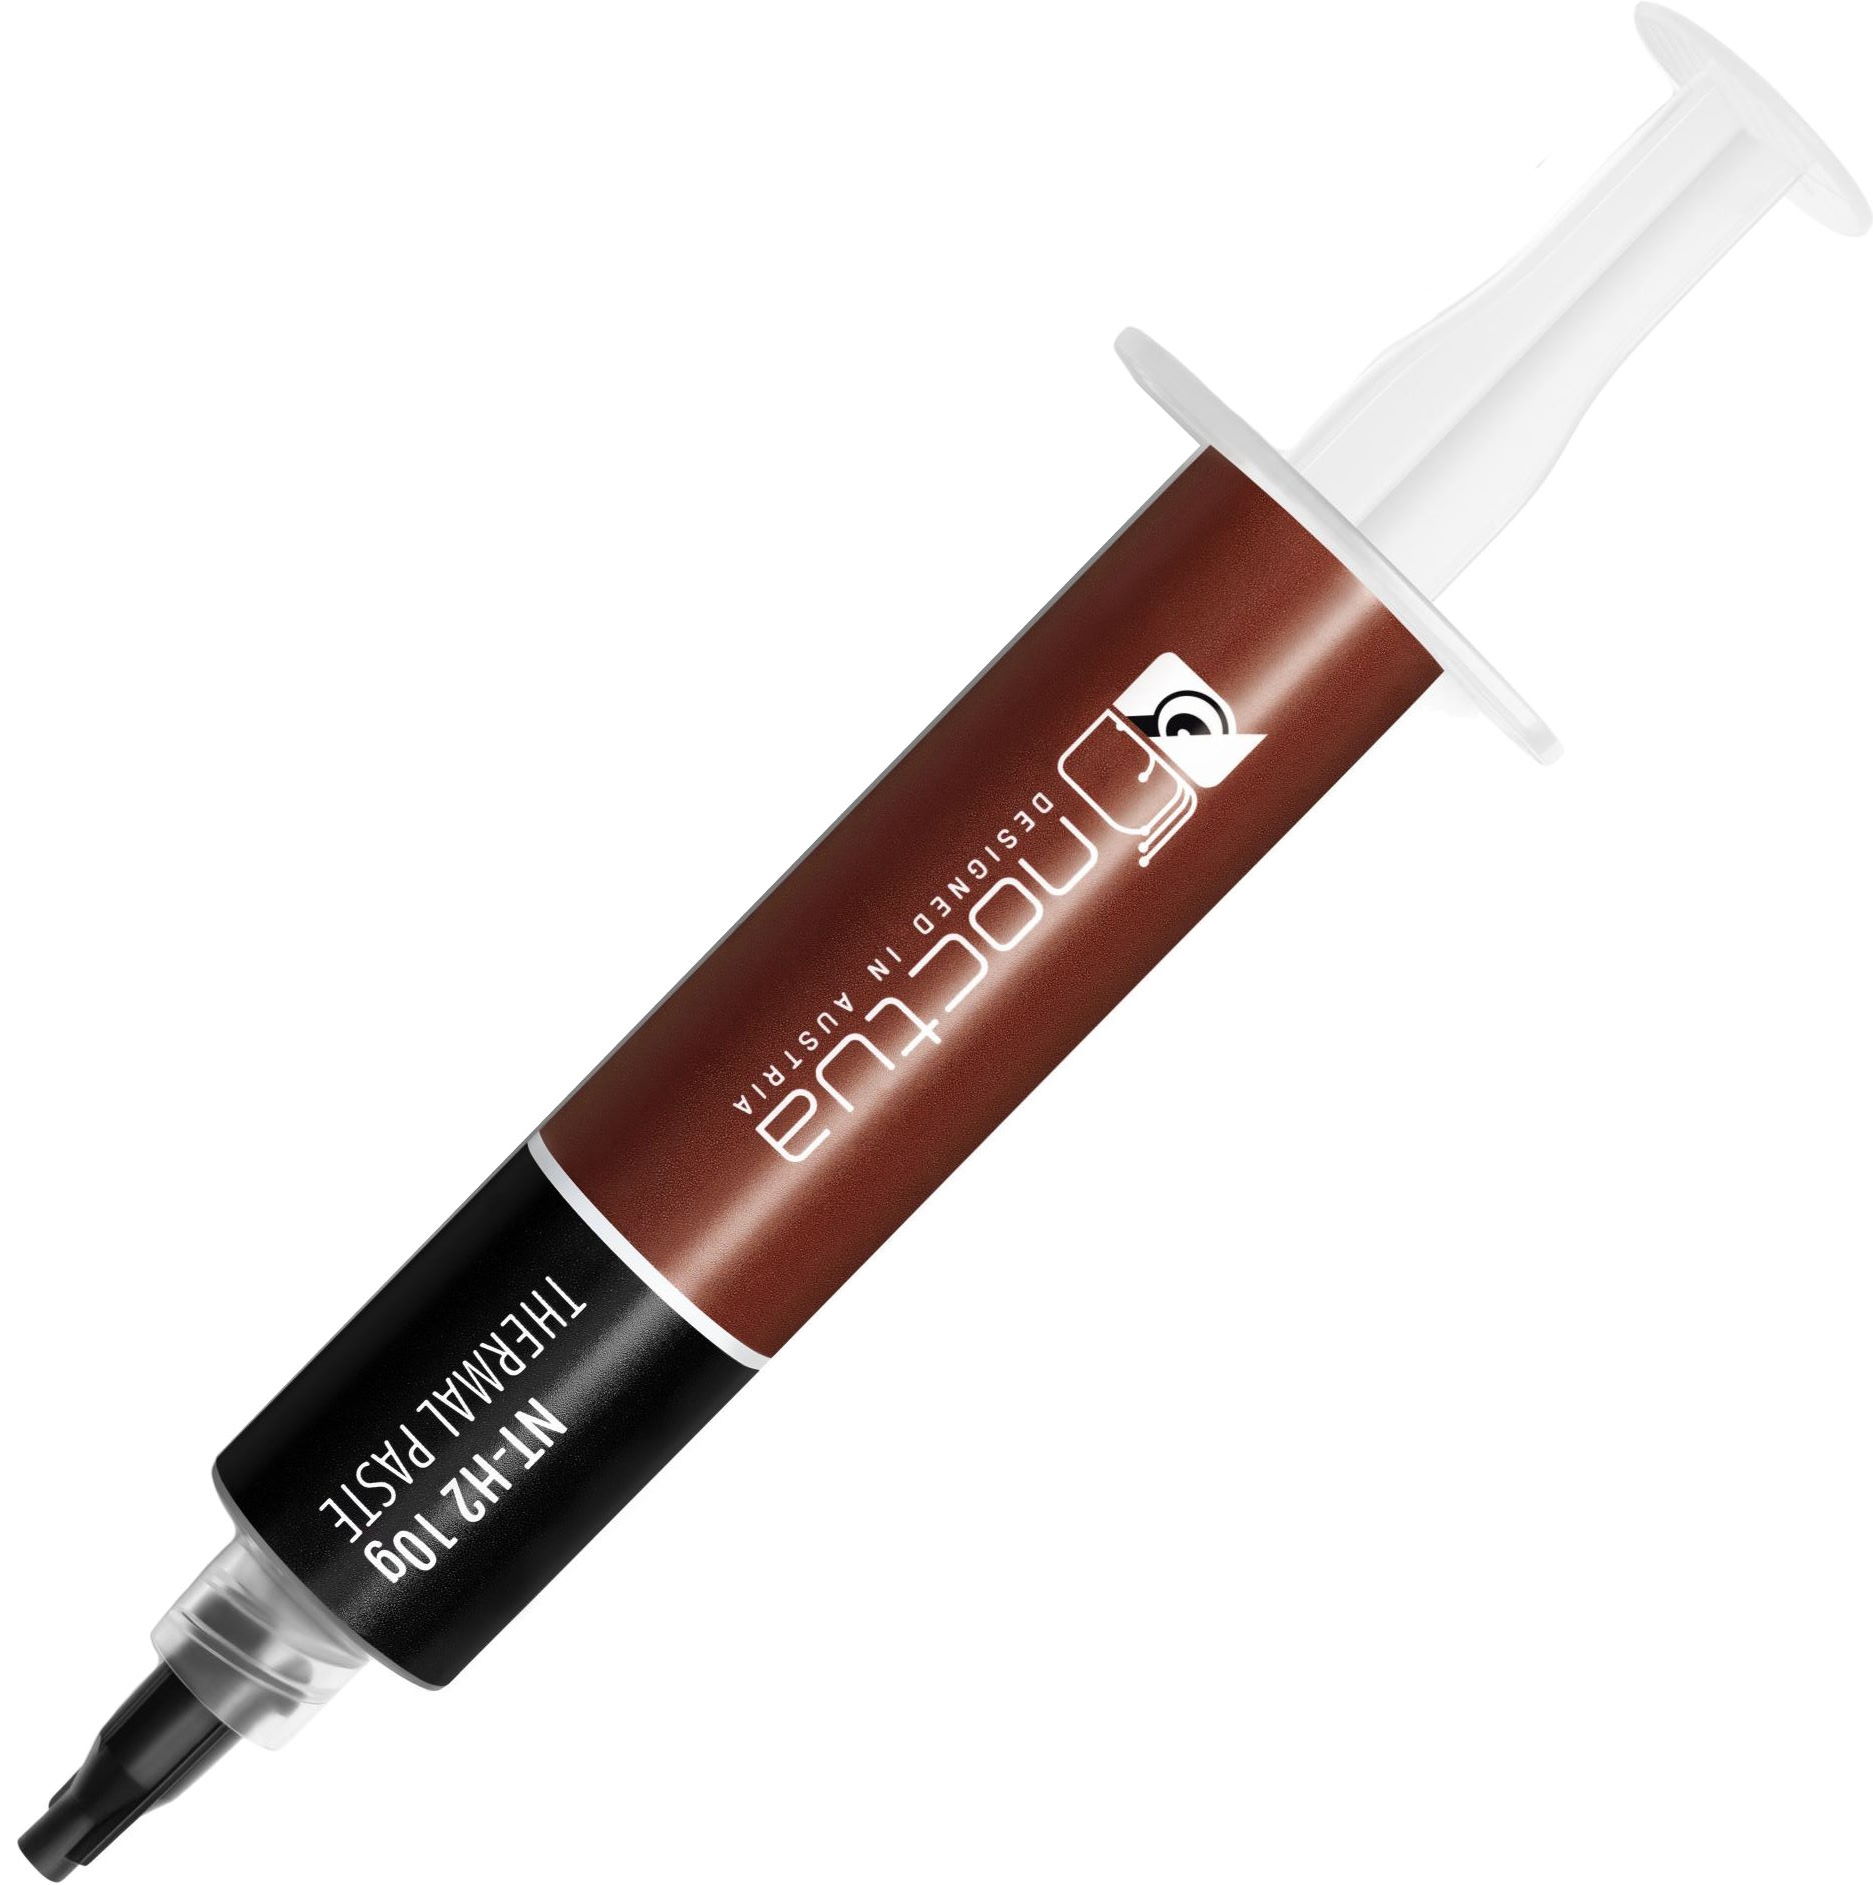 Noctua NT-H2 10G - buy thermal Paste: prices, reviews, specifications >  price in stores Great Britain: London, Manchester, Glasgow, Birmingham,  Edinburgh